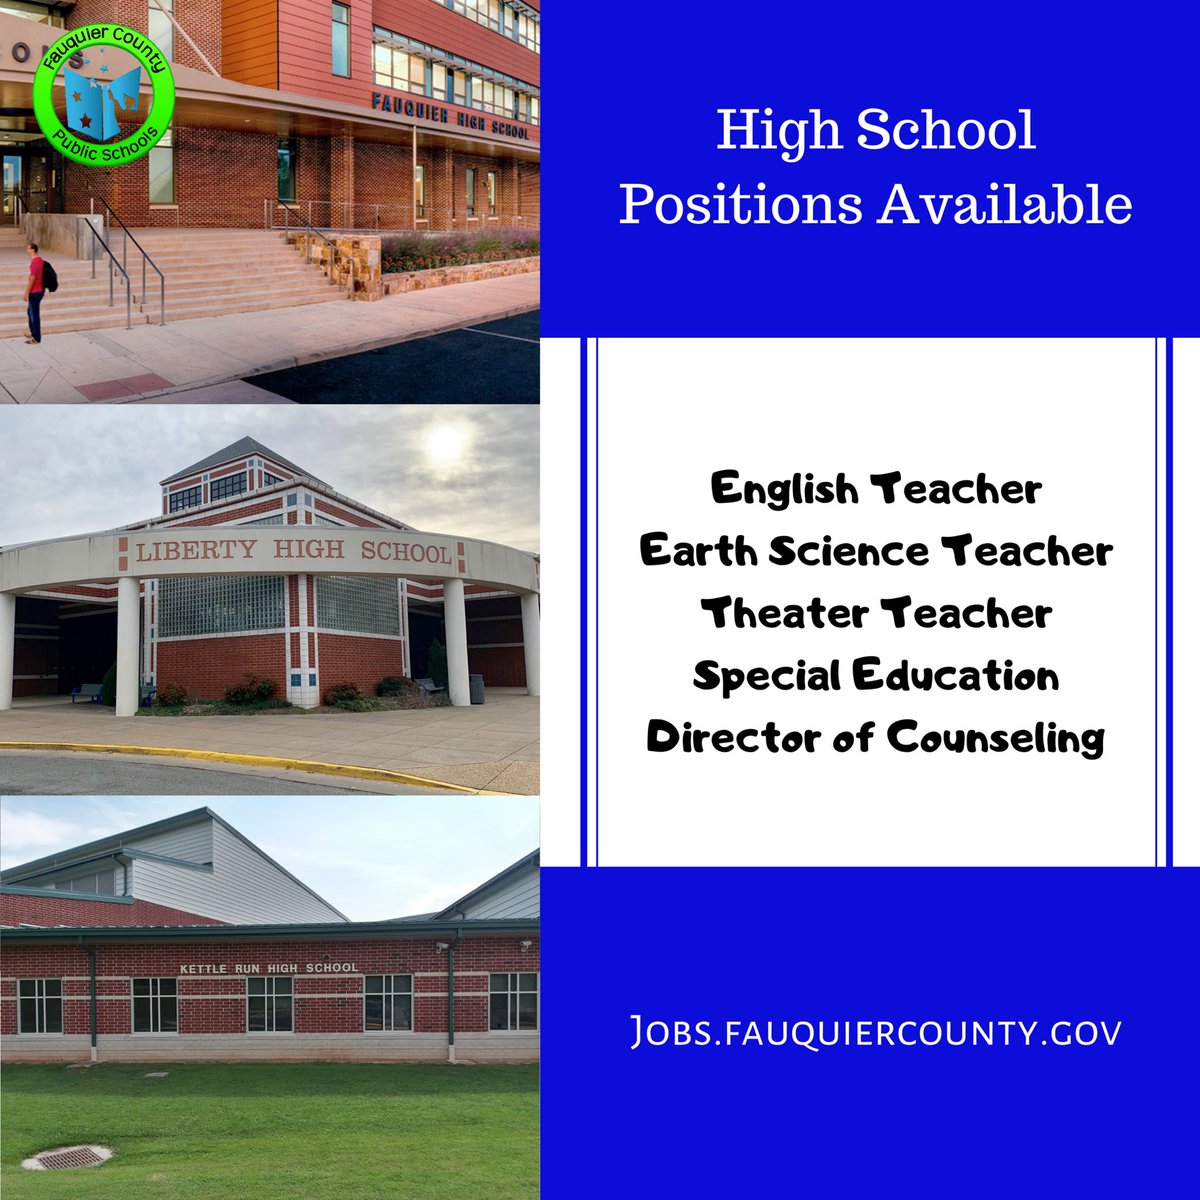 Many teaching opportunities still available in our High Schools! Everything from English to Science! Find your place in our group of amazing educators! Visit Jobs.fauquiercounty.gov for a full listing of vacancies!
#fcps1kidsdeserveit 
#secondaryteachers